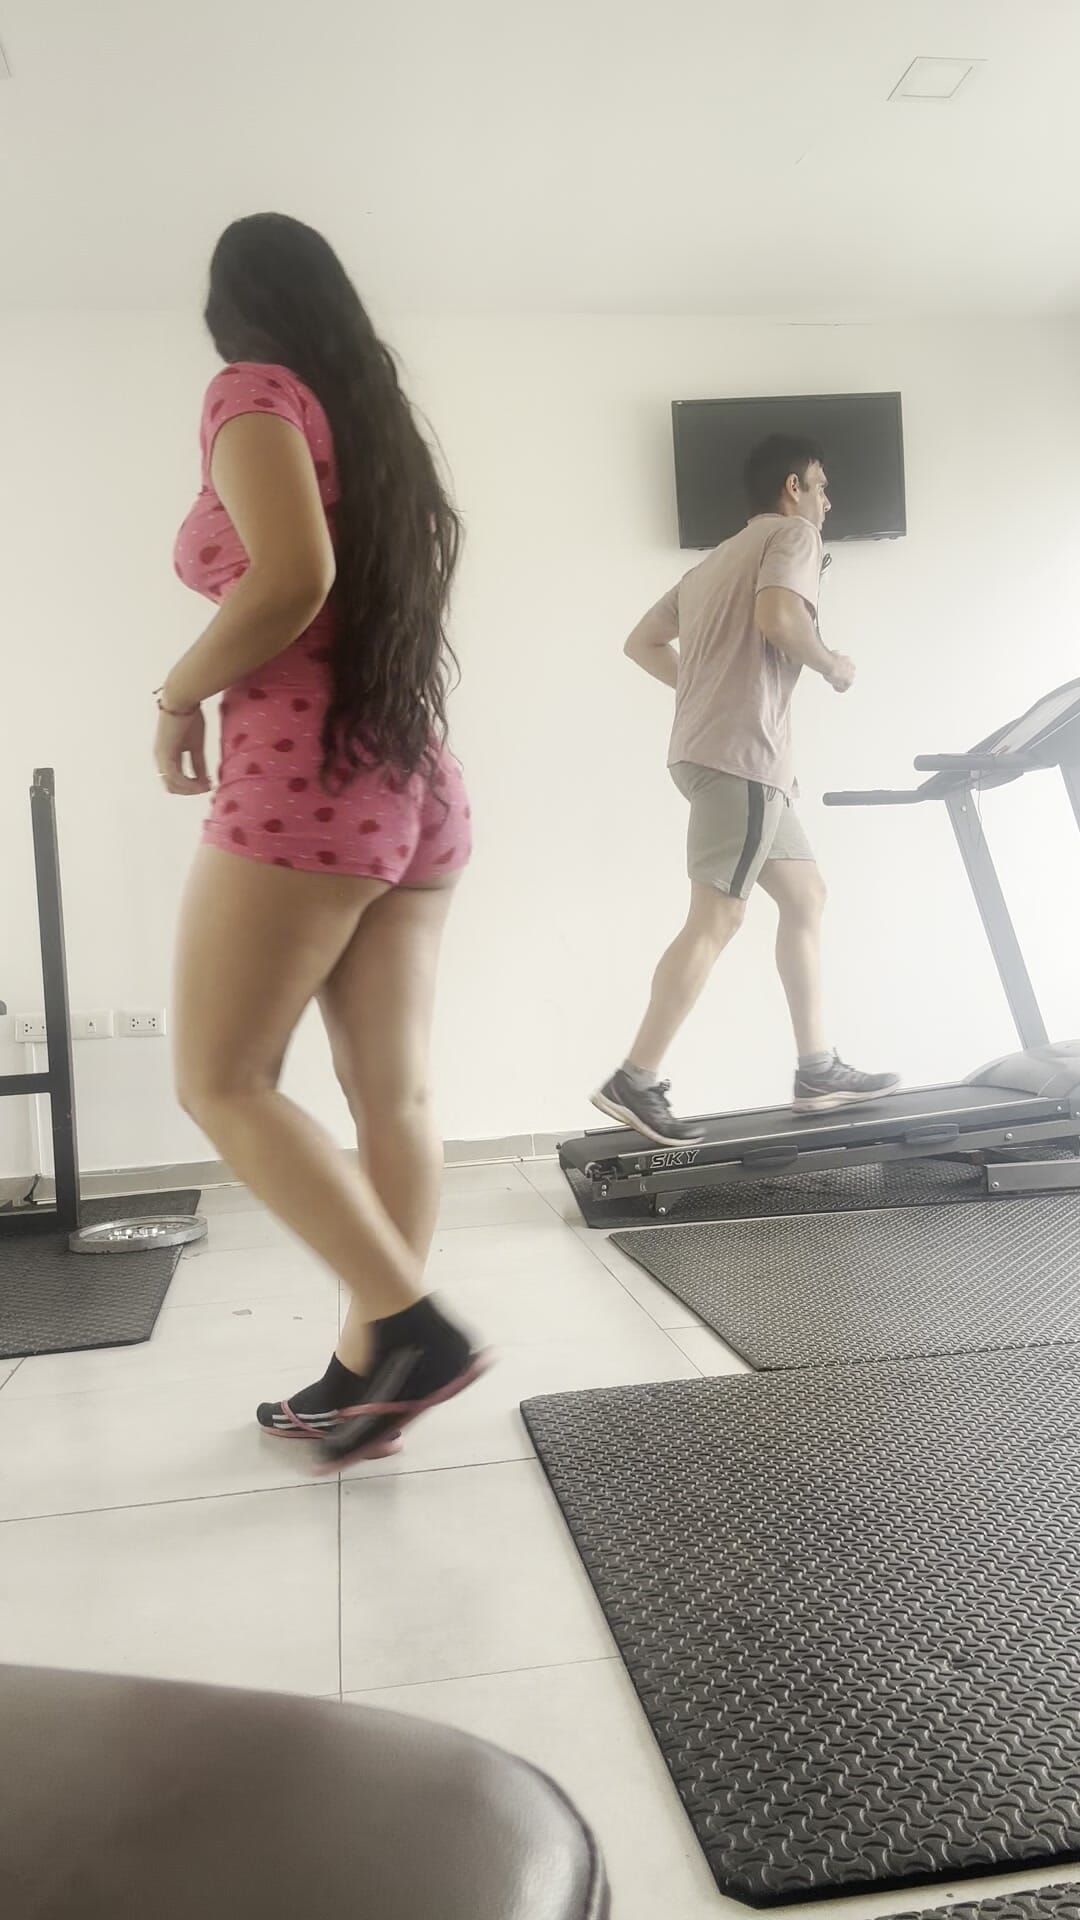 I show my ass without my neighbor seeing me at the gym